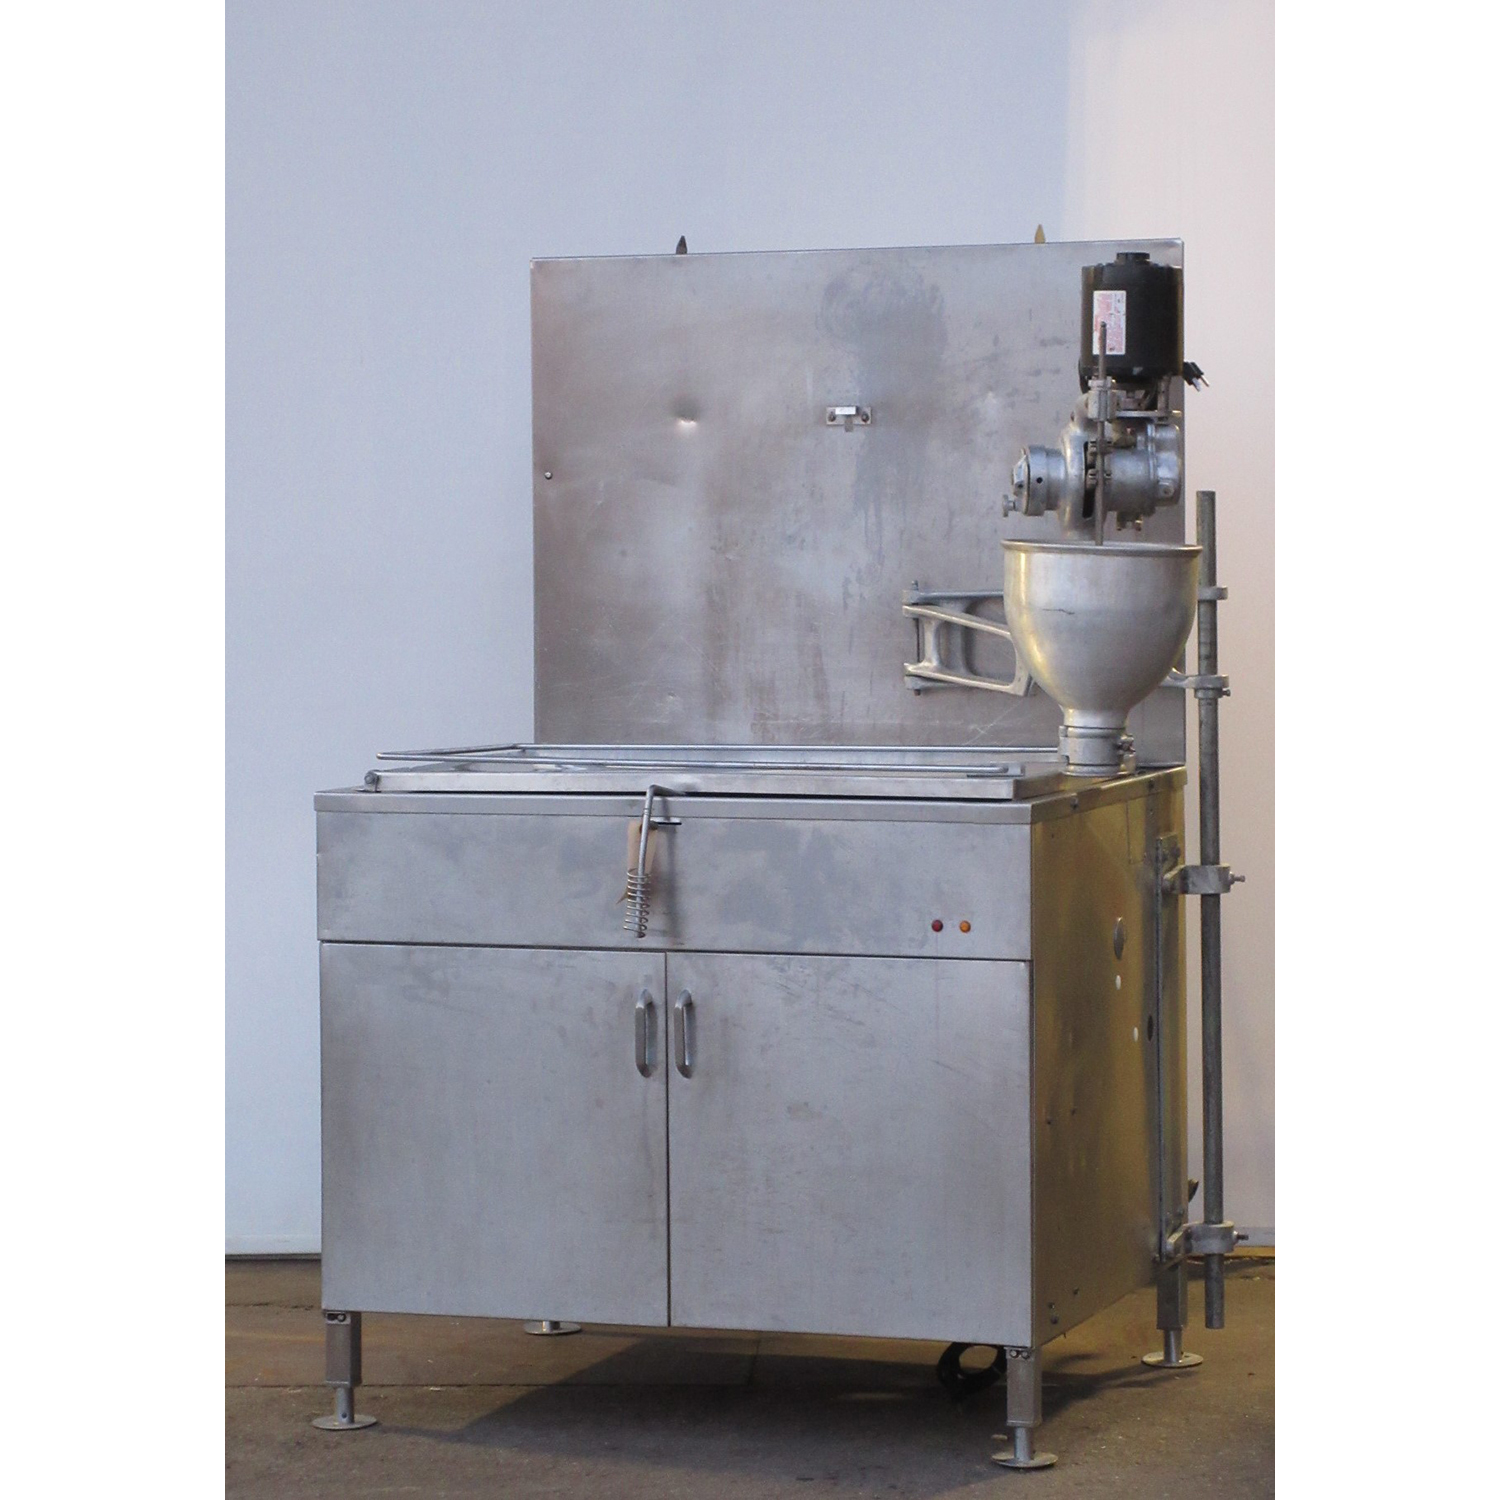 Belshaw 734CG 34" Donut Fryer, Gas, Used Excellent Condition image 5